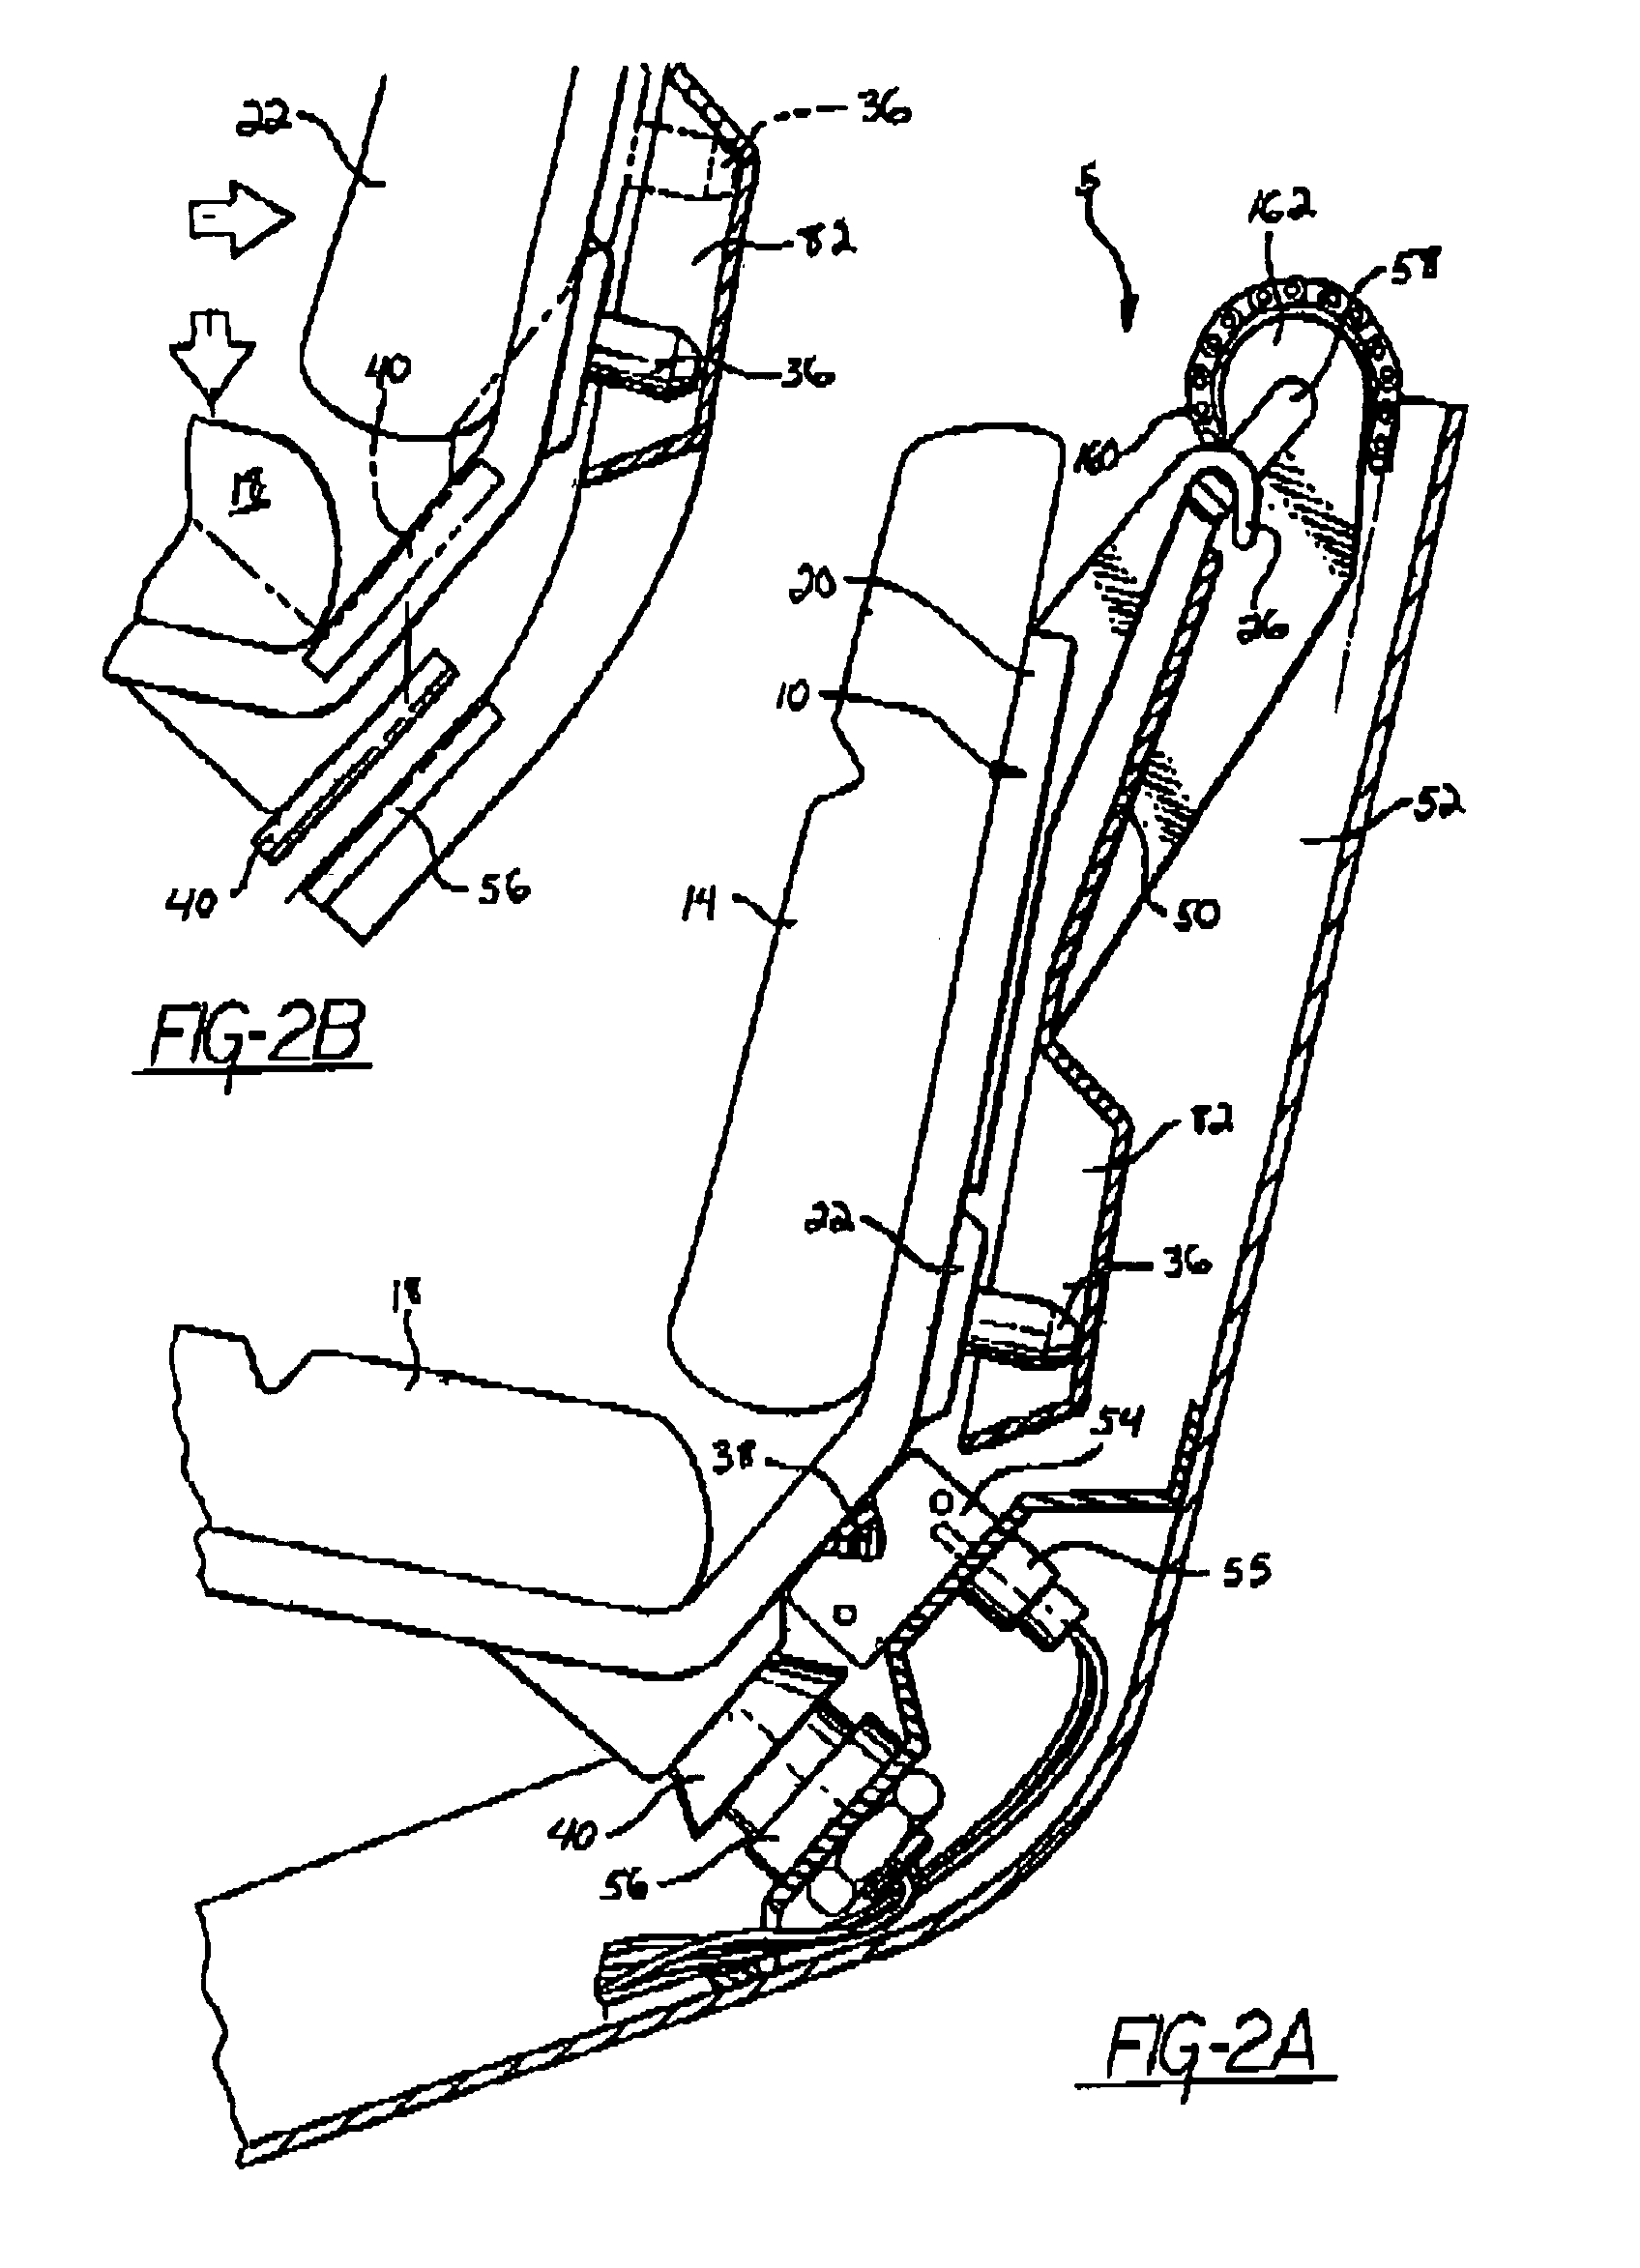 Lift mechanism for a seating device